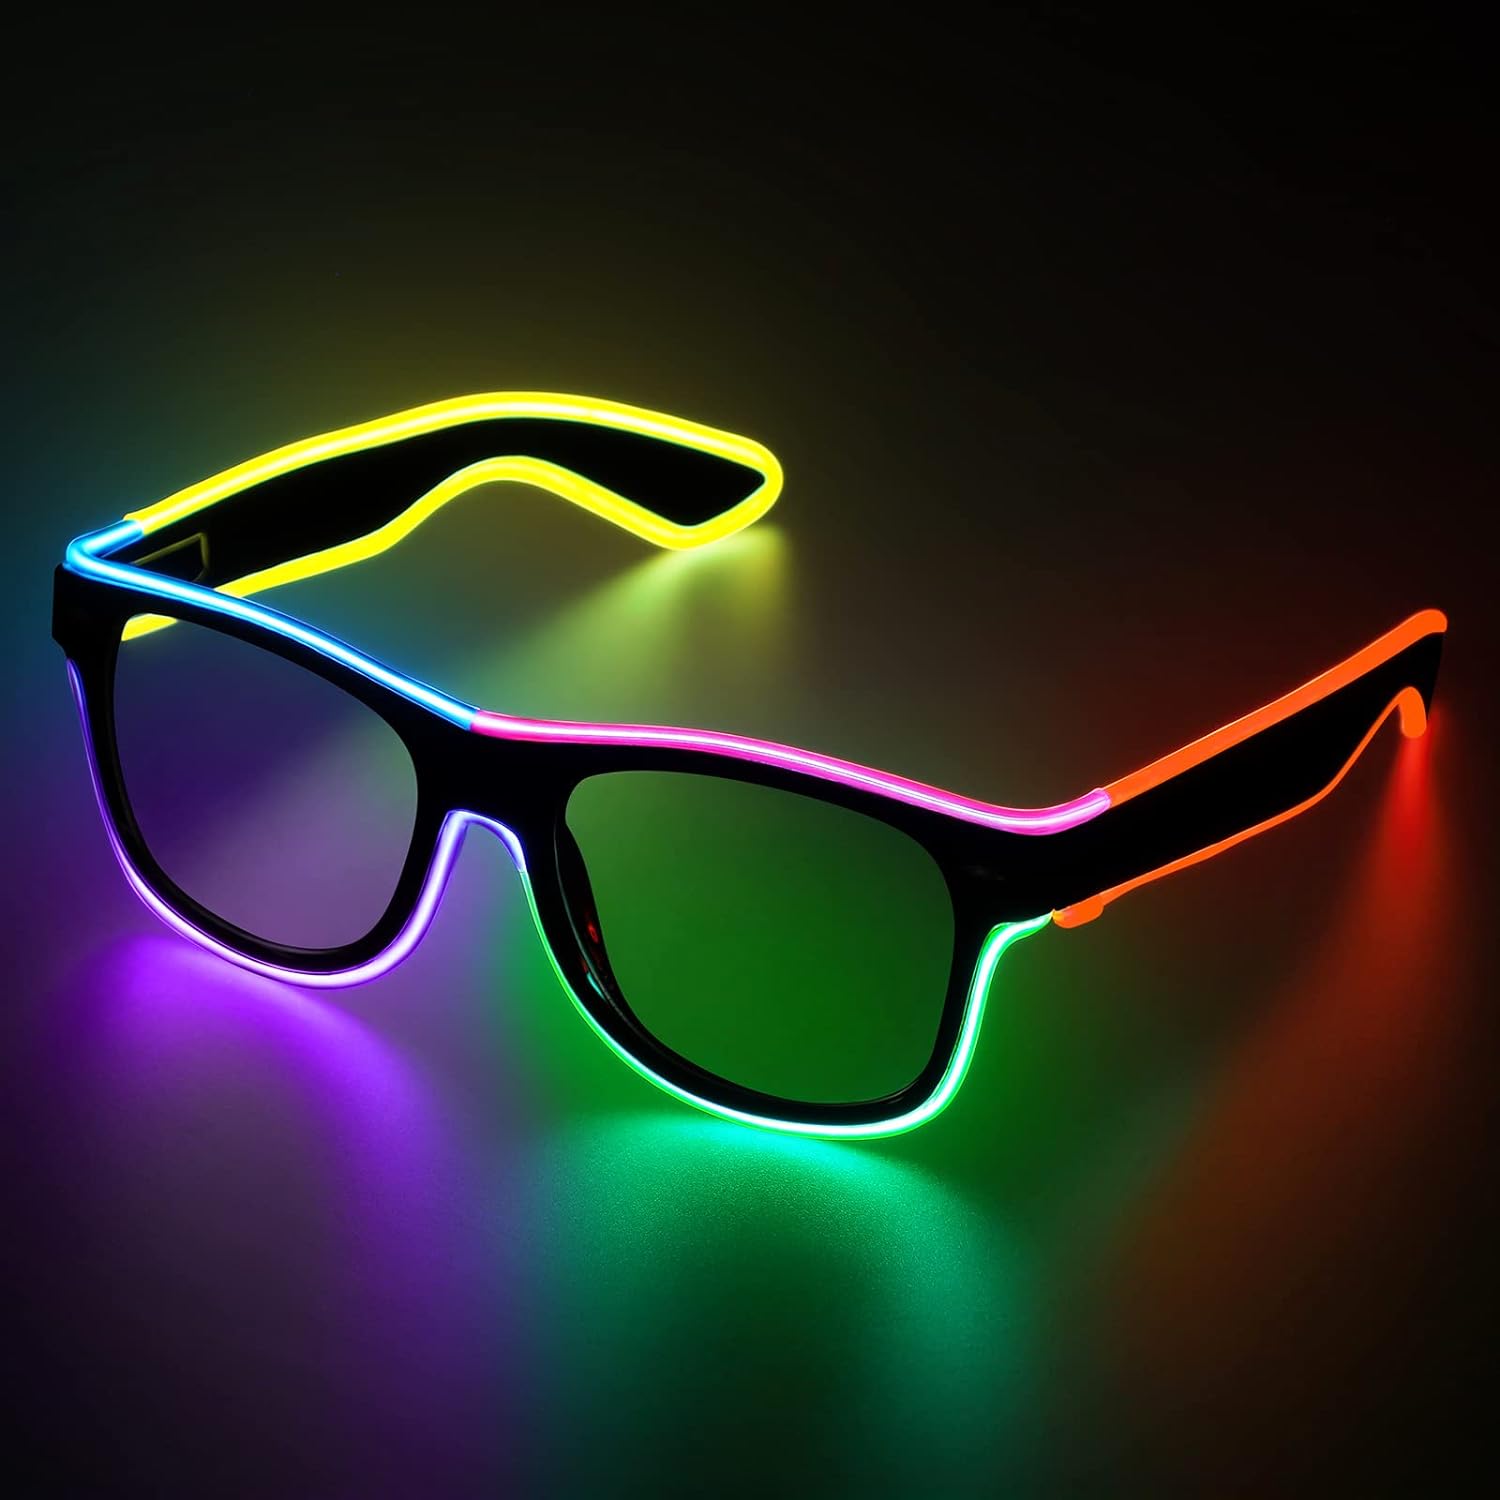 High Quality LED Glowing Glasses - Easy Control with 4 Modes - Safe Cold Light Technology